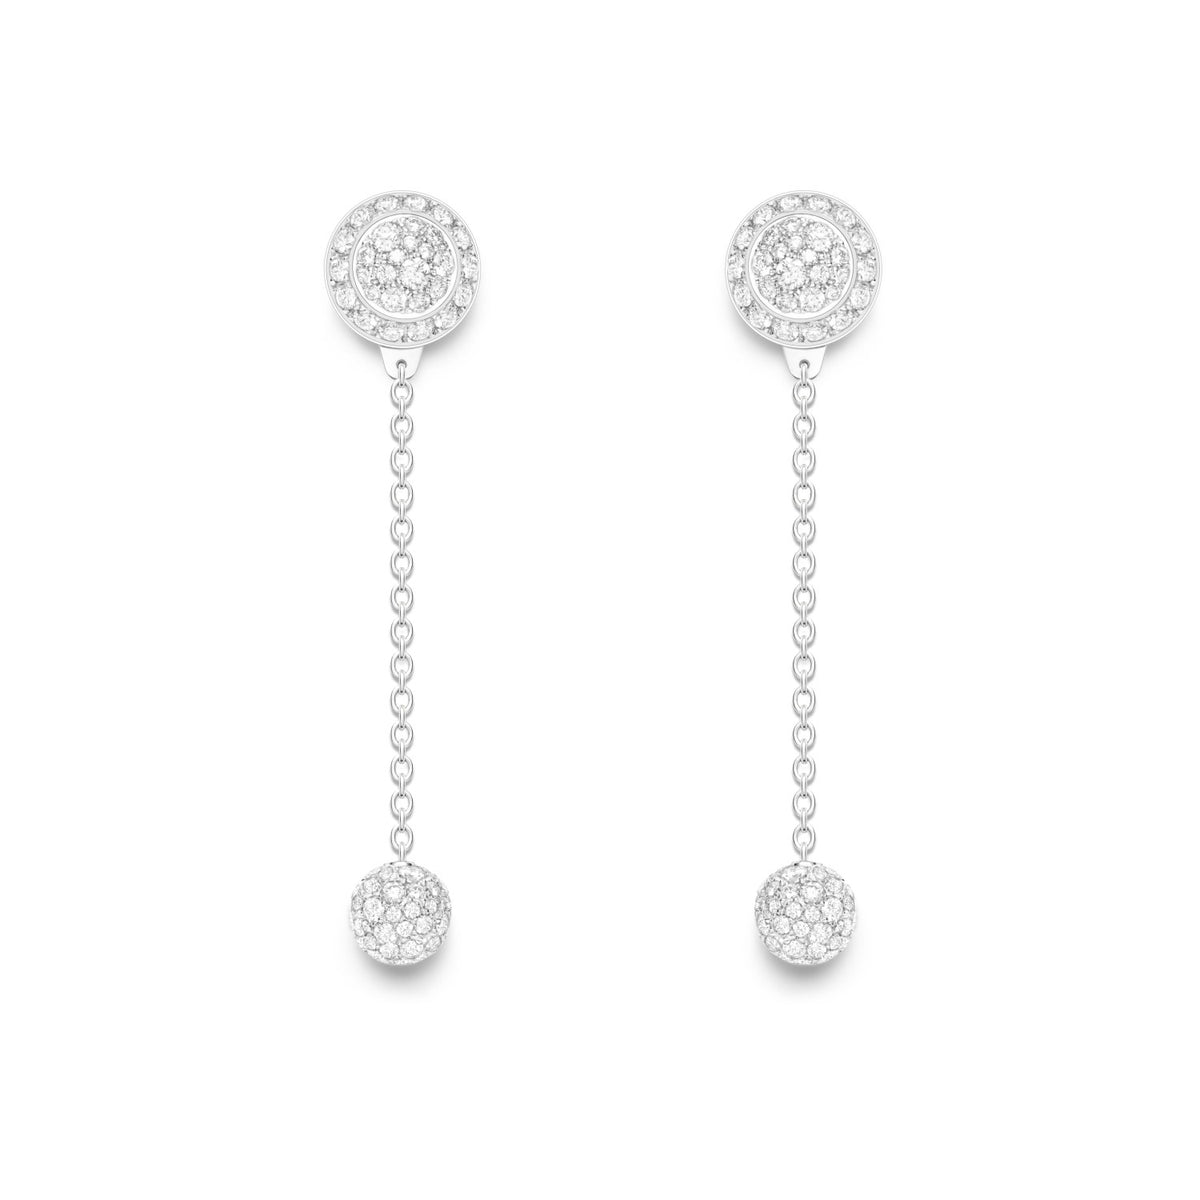 Possession earrings in 18K white gold set with 184 brilliant-cut diamonds (approx. 1.47 ct). 2 ways of wearing.